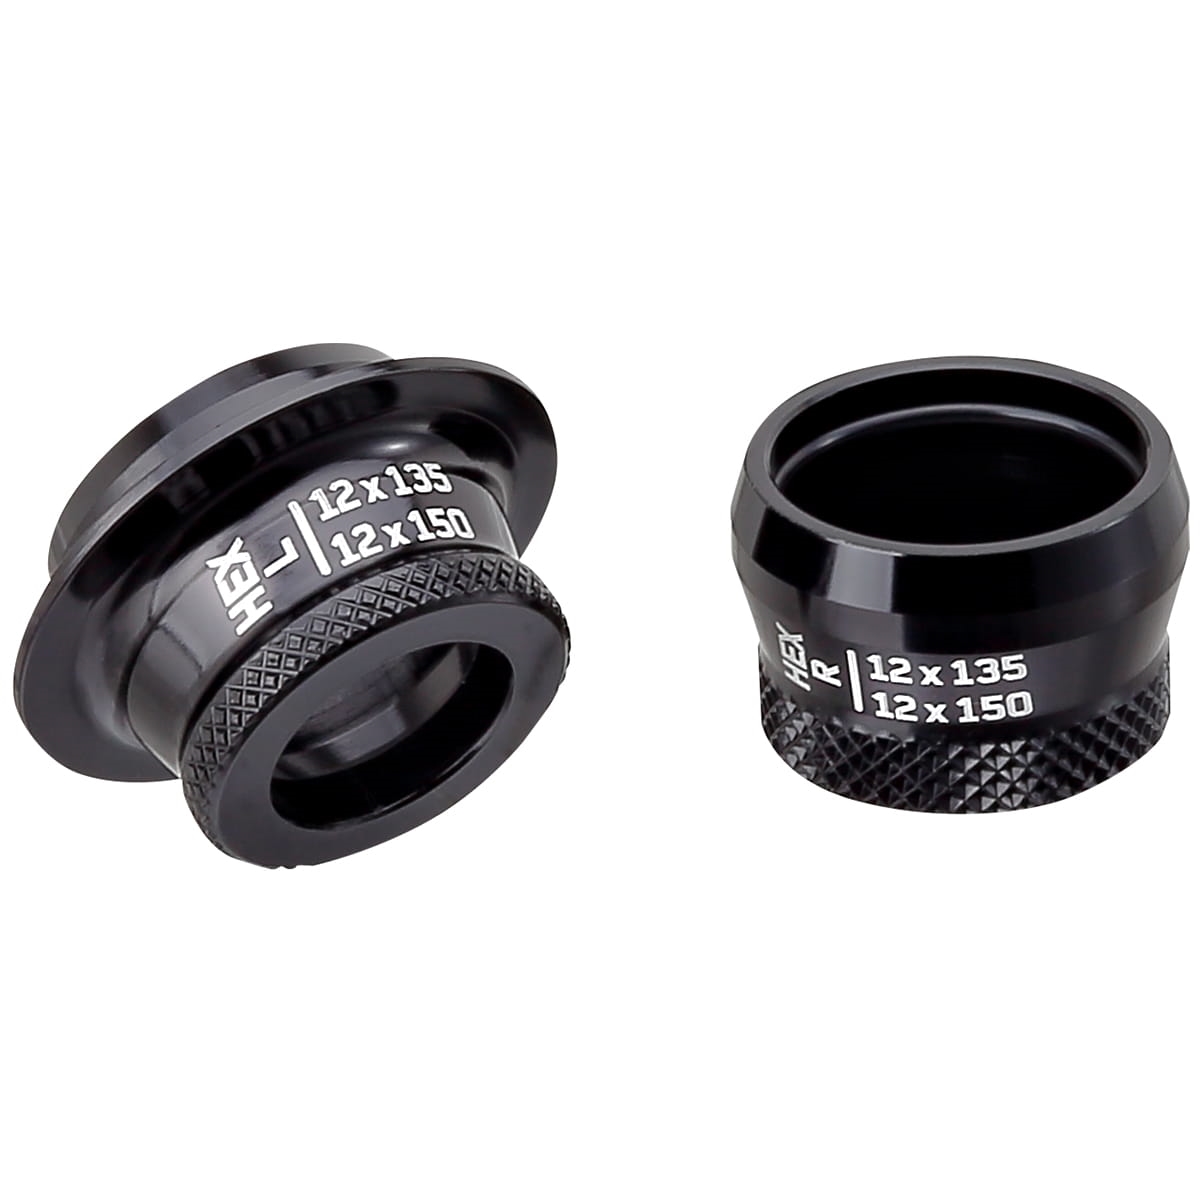 Hex rear hub adapter for conversion to standard 12x135mm and 12x150mm